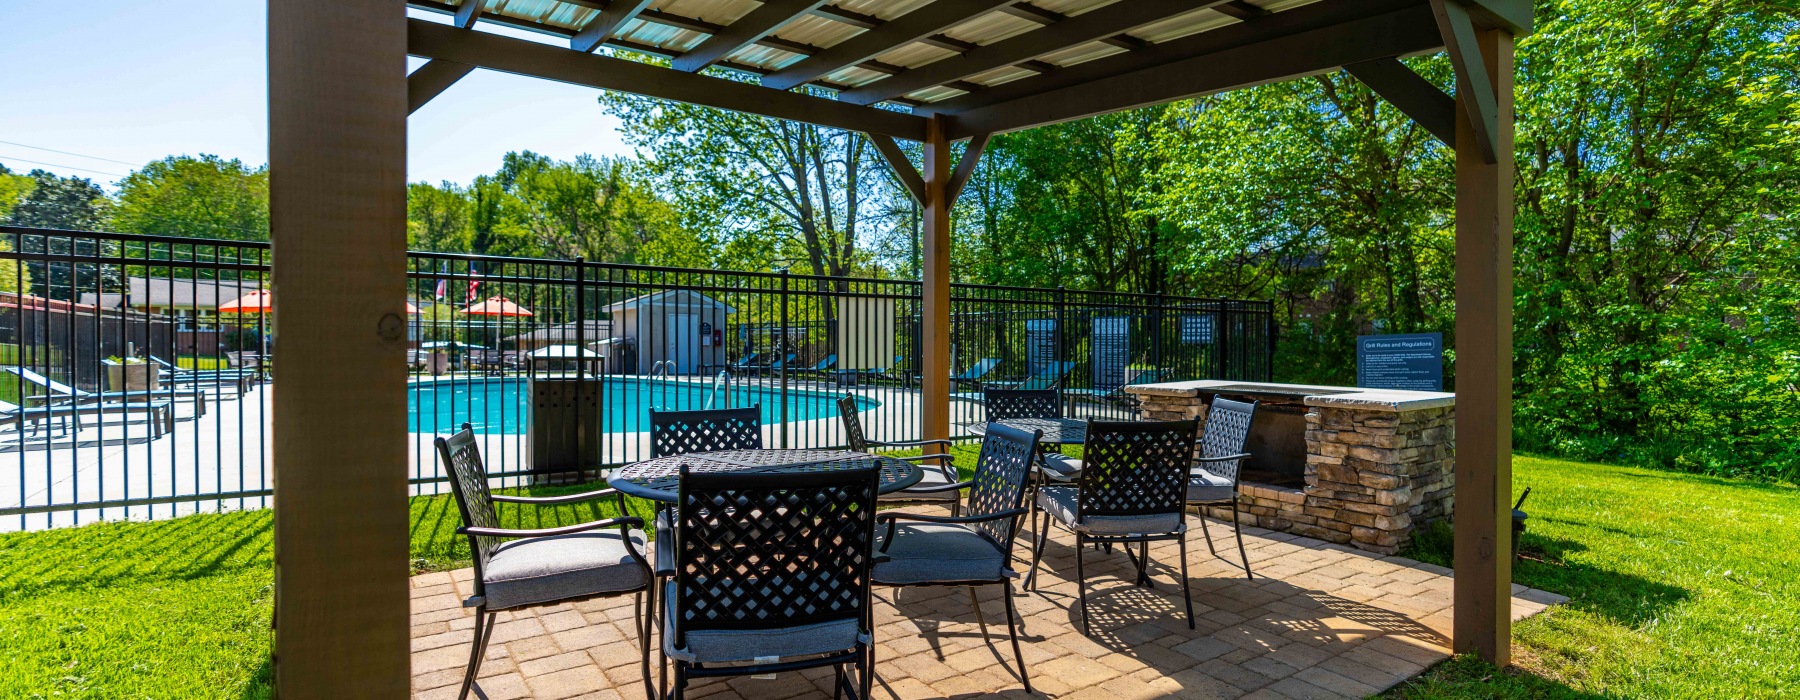 Pergola by the pool with ample seating